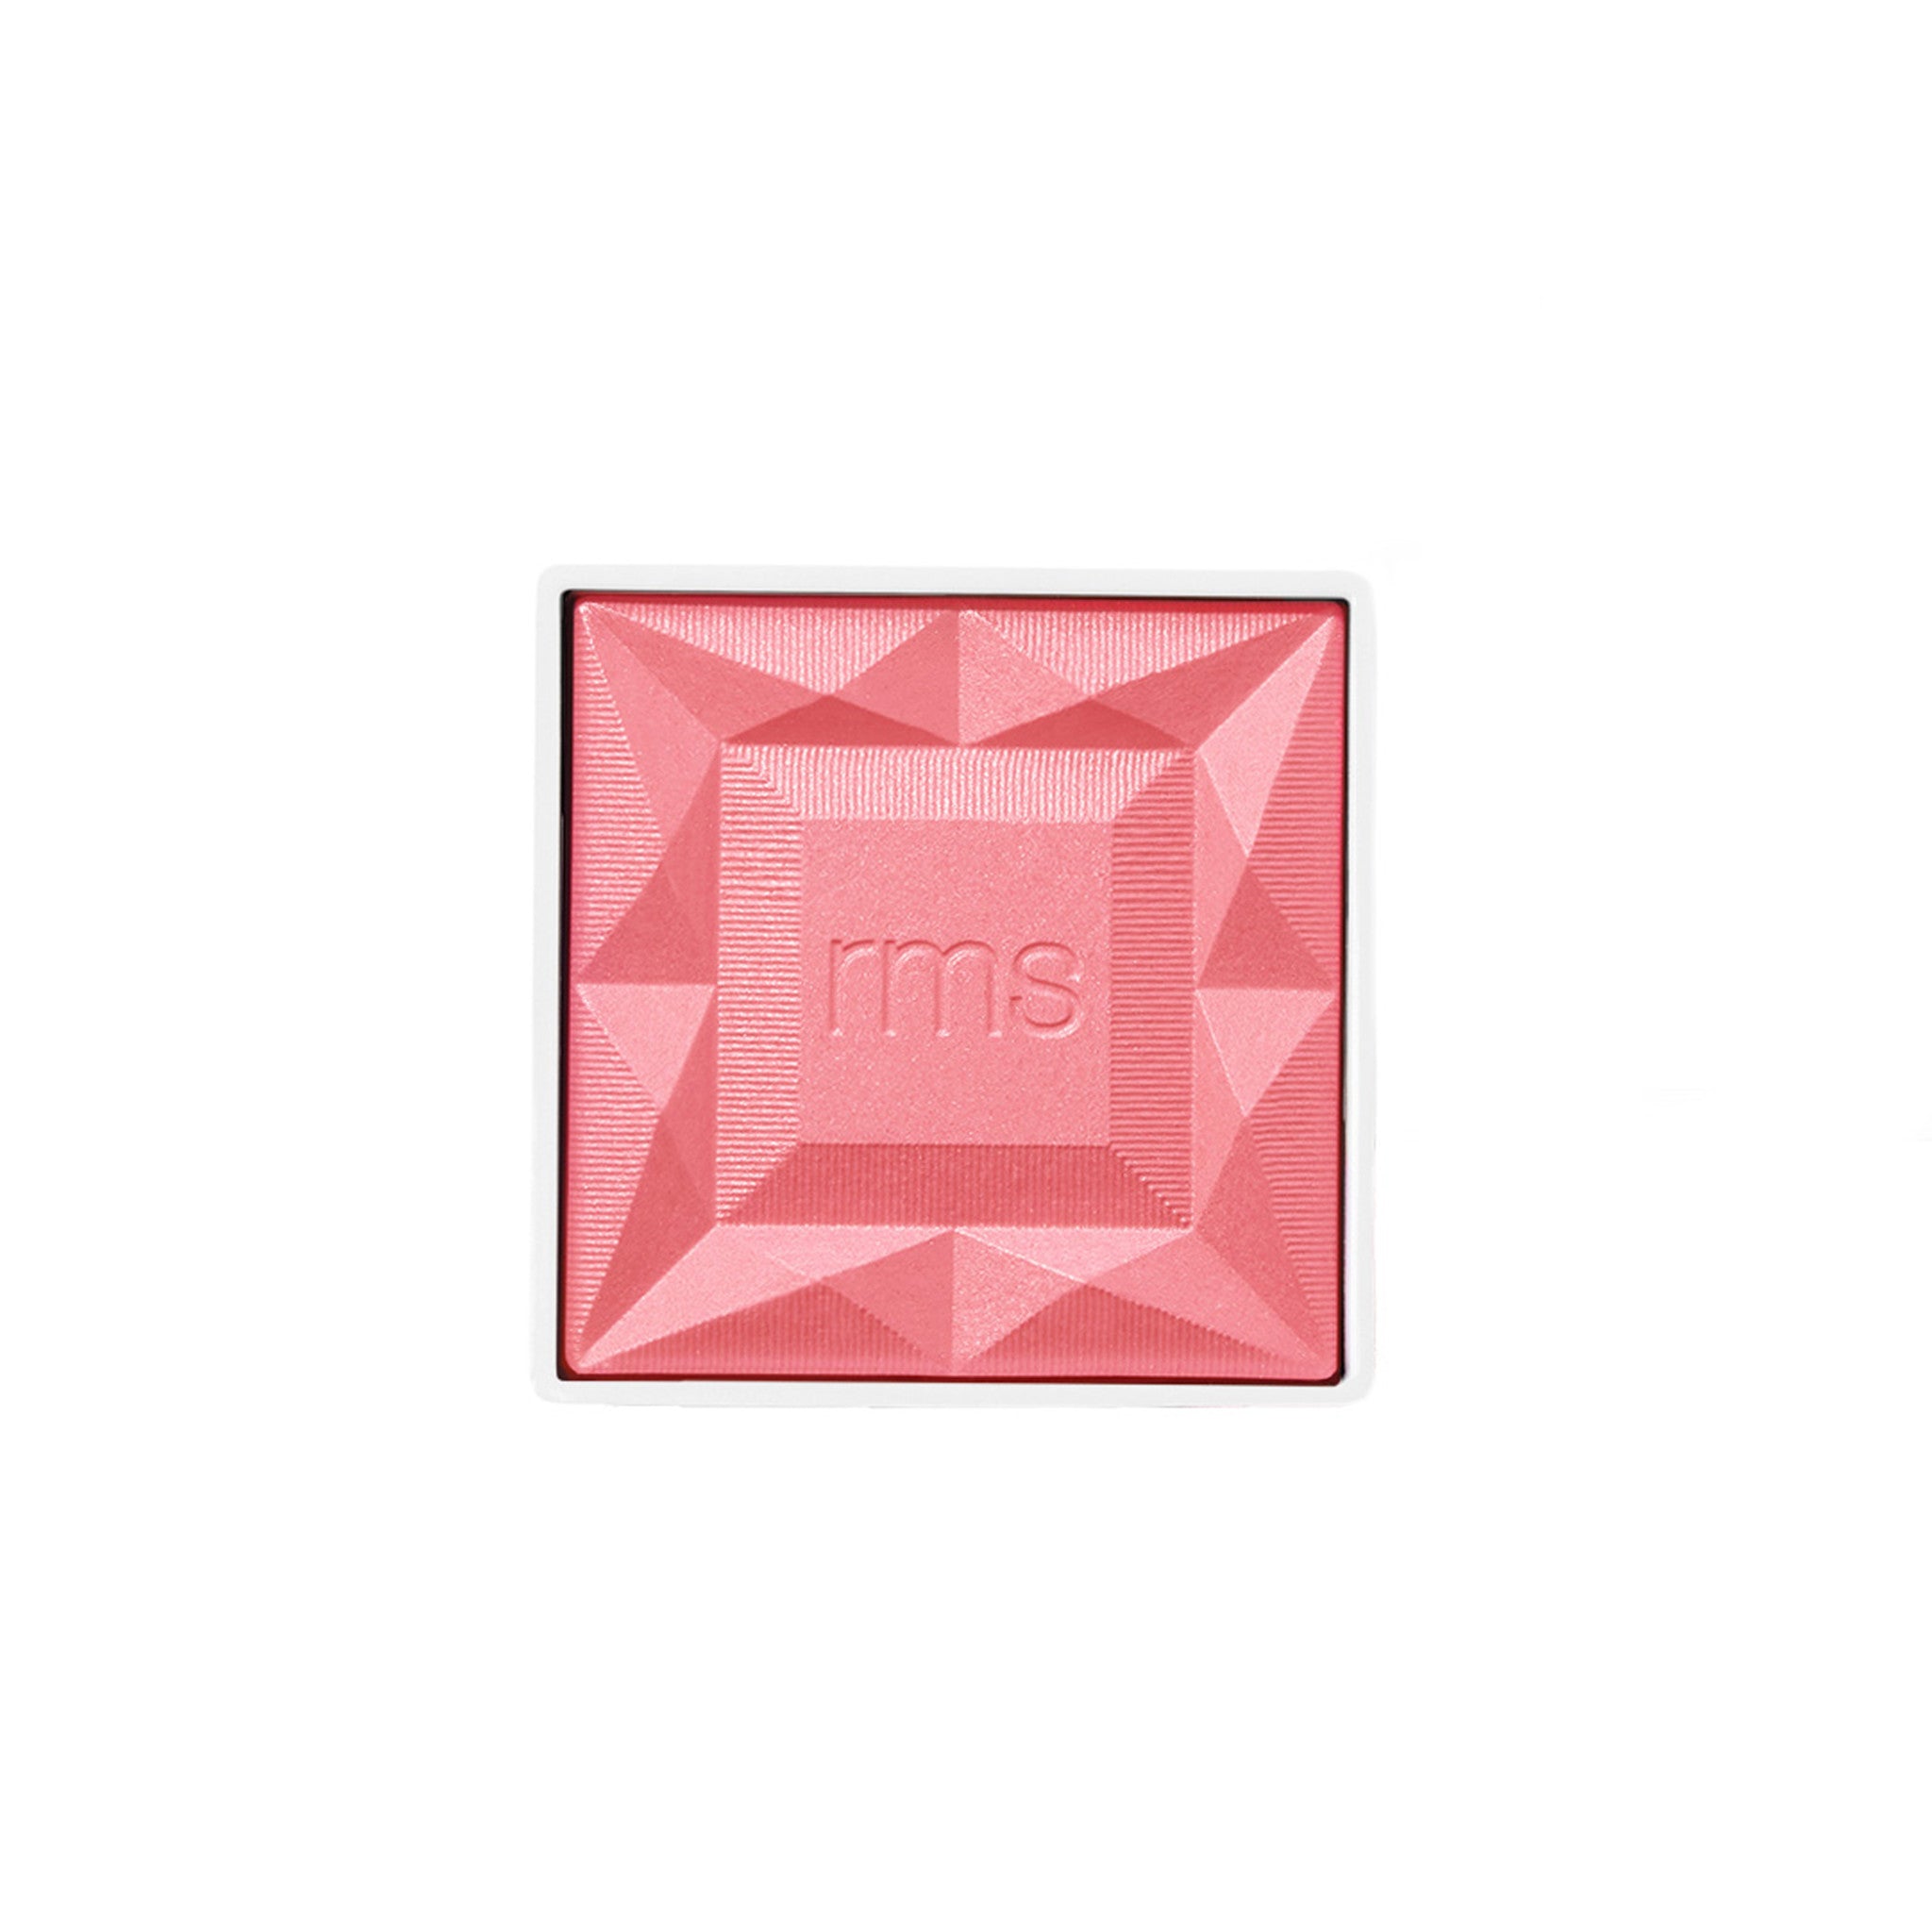 RMS Beauty ReDimension Hydra Powder Blush Refill Color/Shade variant: French Rose main image. This product is in the color pink